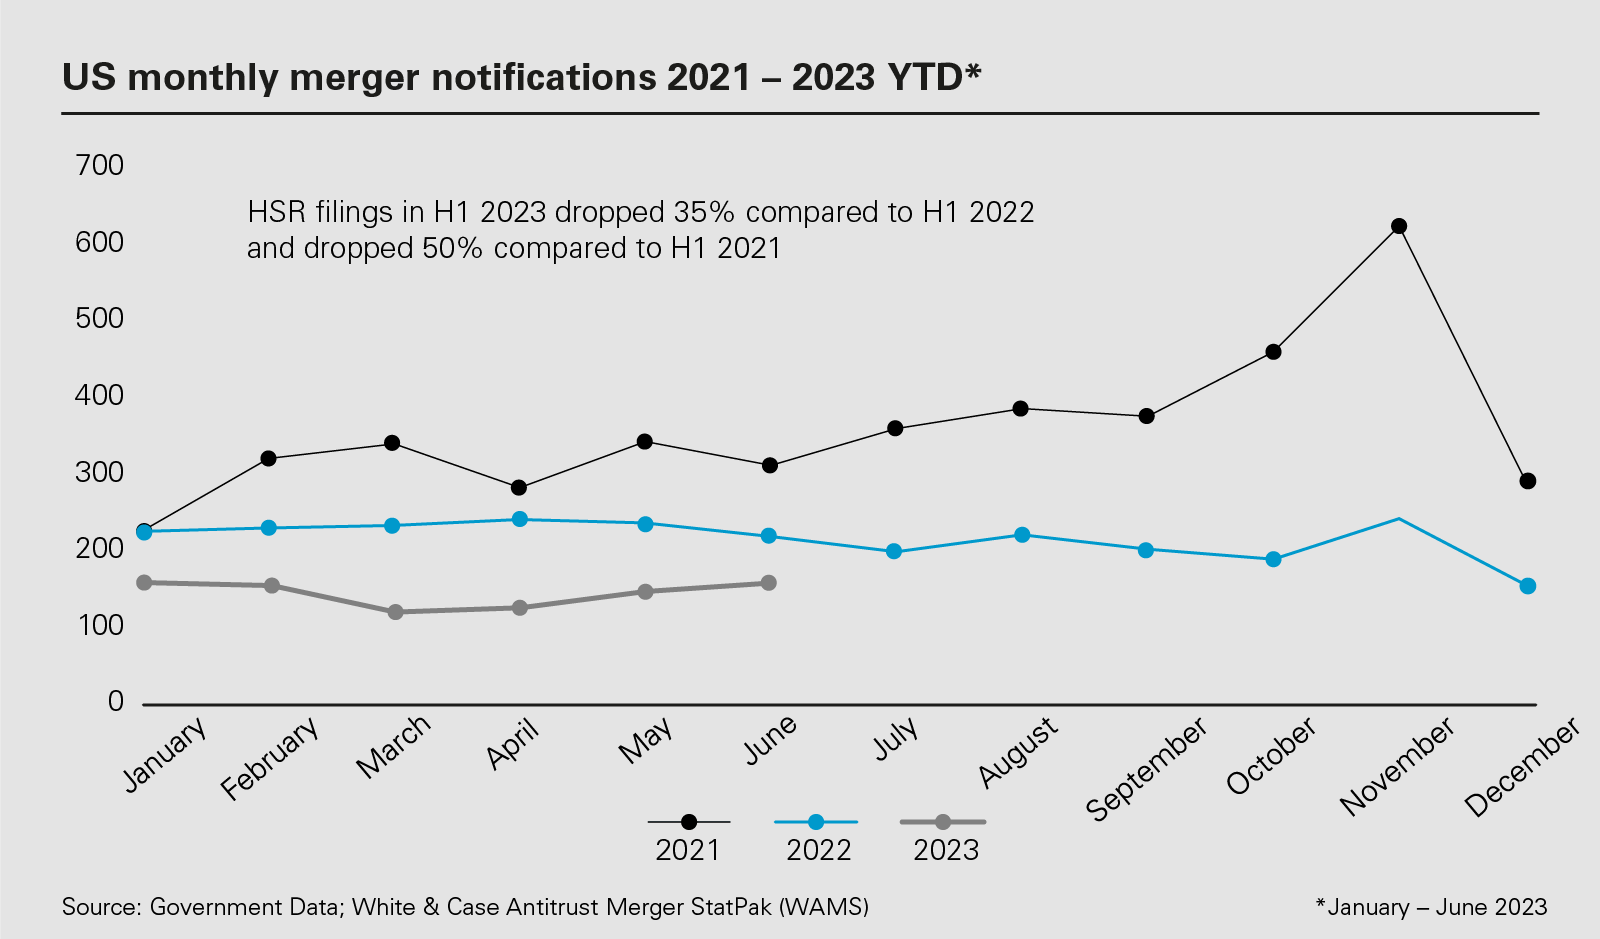 US monthly merger notifications 2021 - 2023 YTD